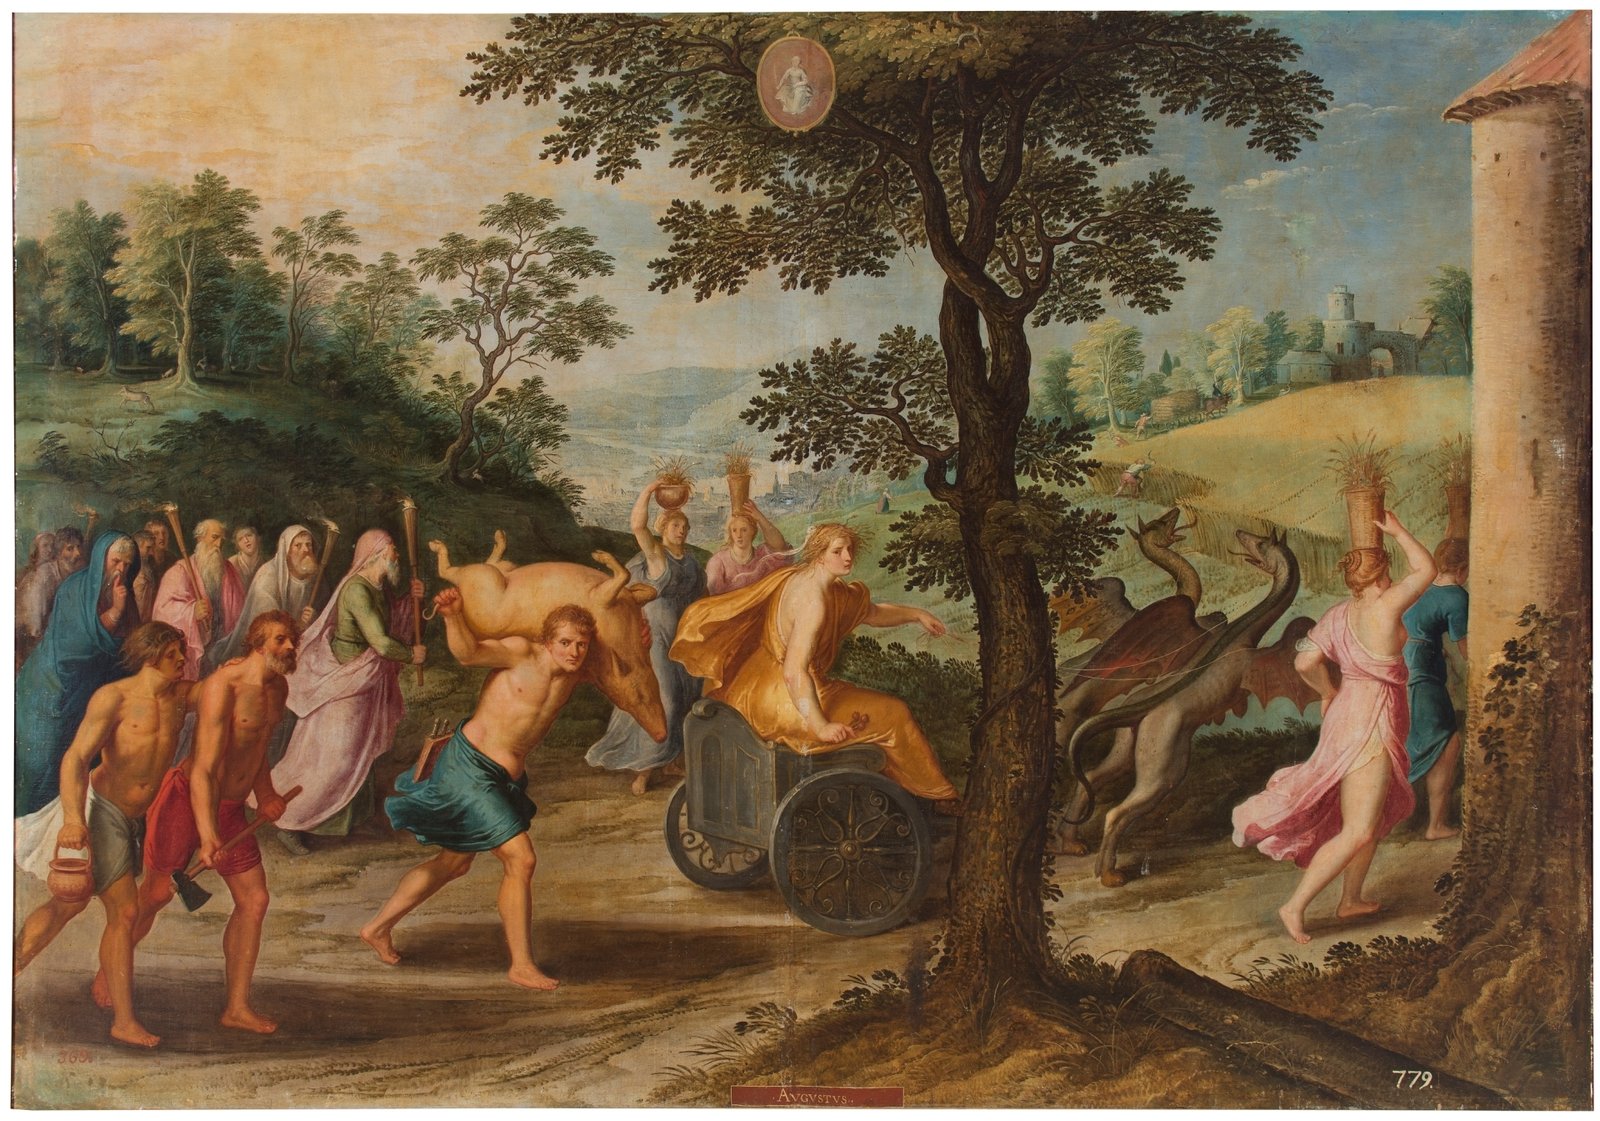 This painting represents Ceres, the roman goddess of agriculture riding a charriot, drawn by two little dragons and a crowd of people walking by her side.